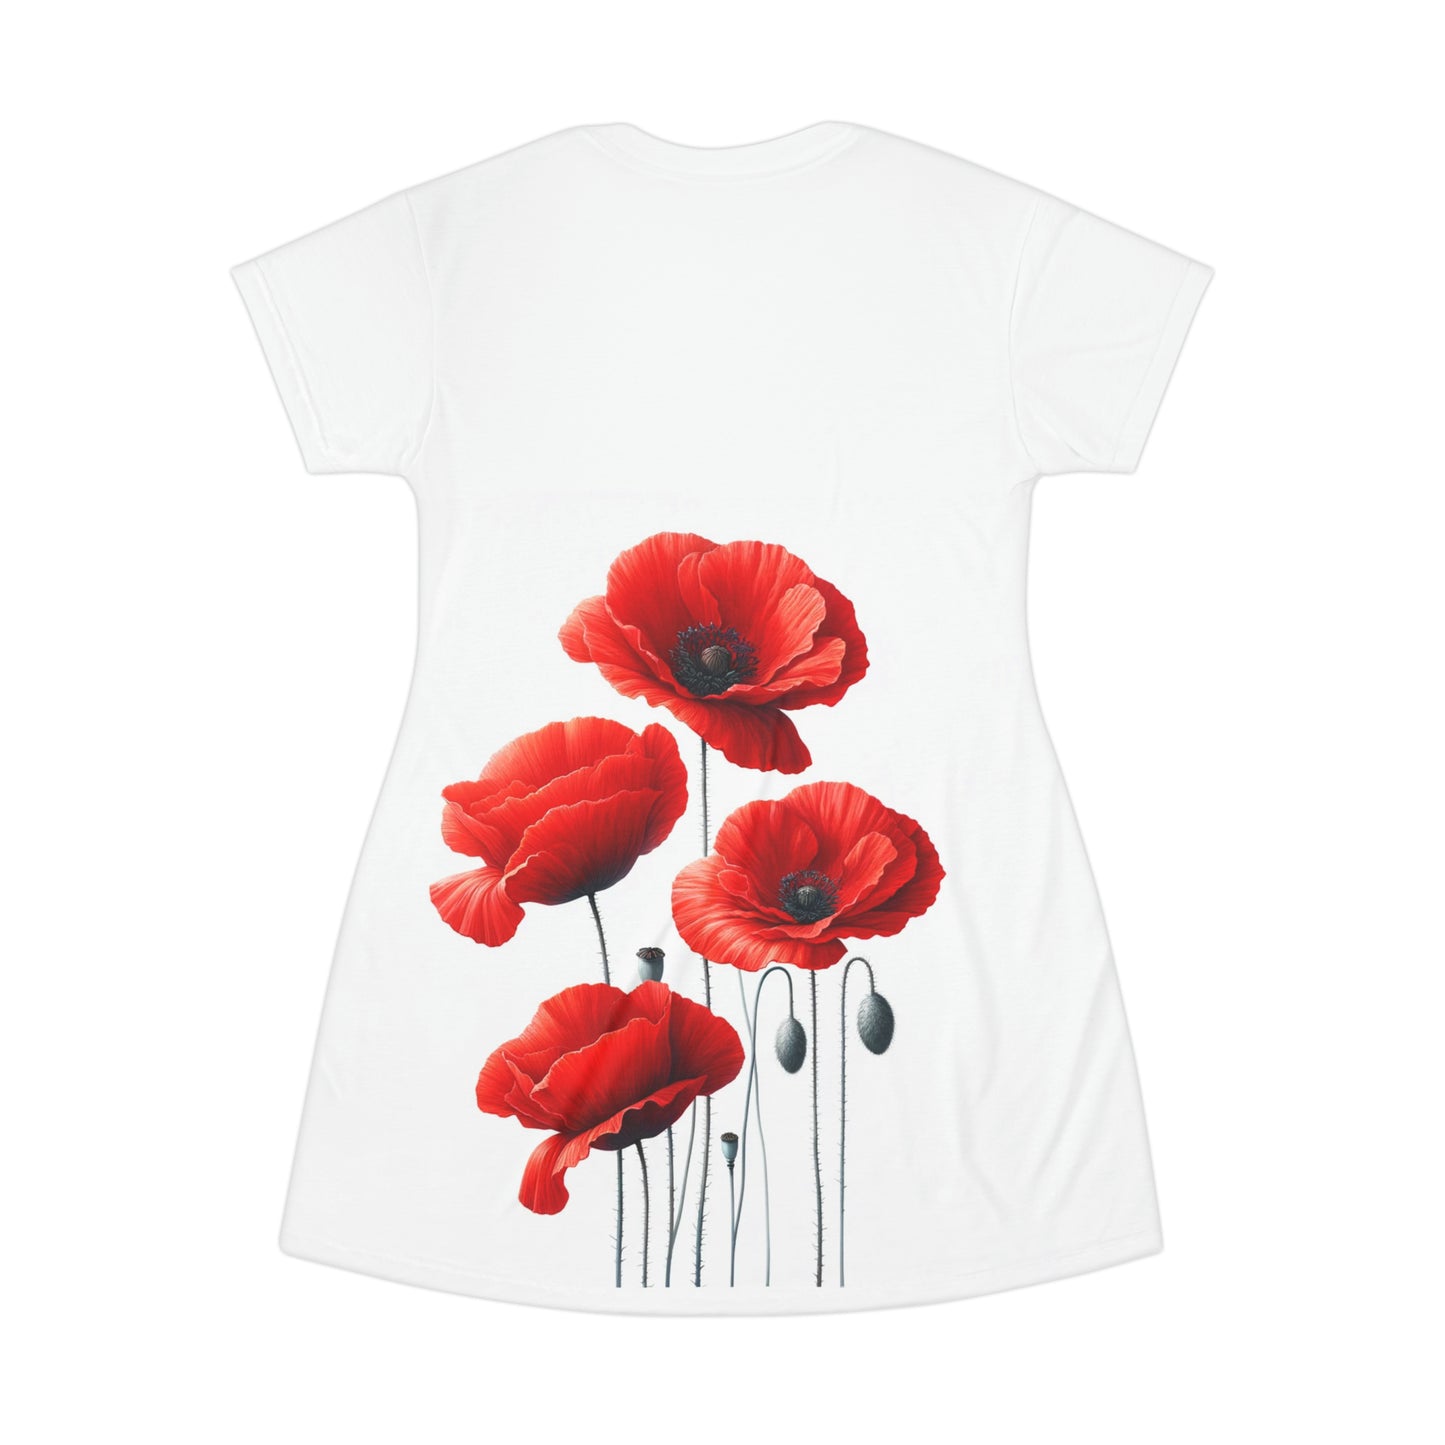 T-Shirt Dress with Poppies